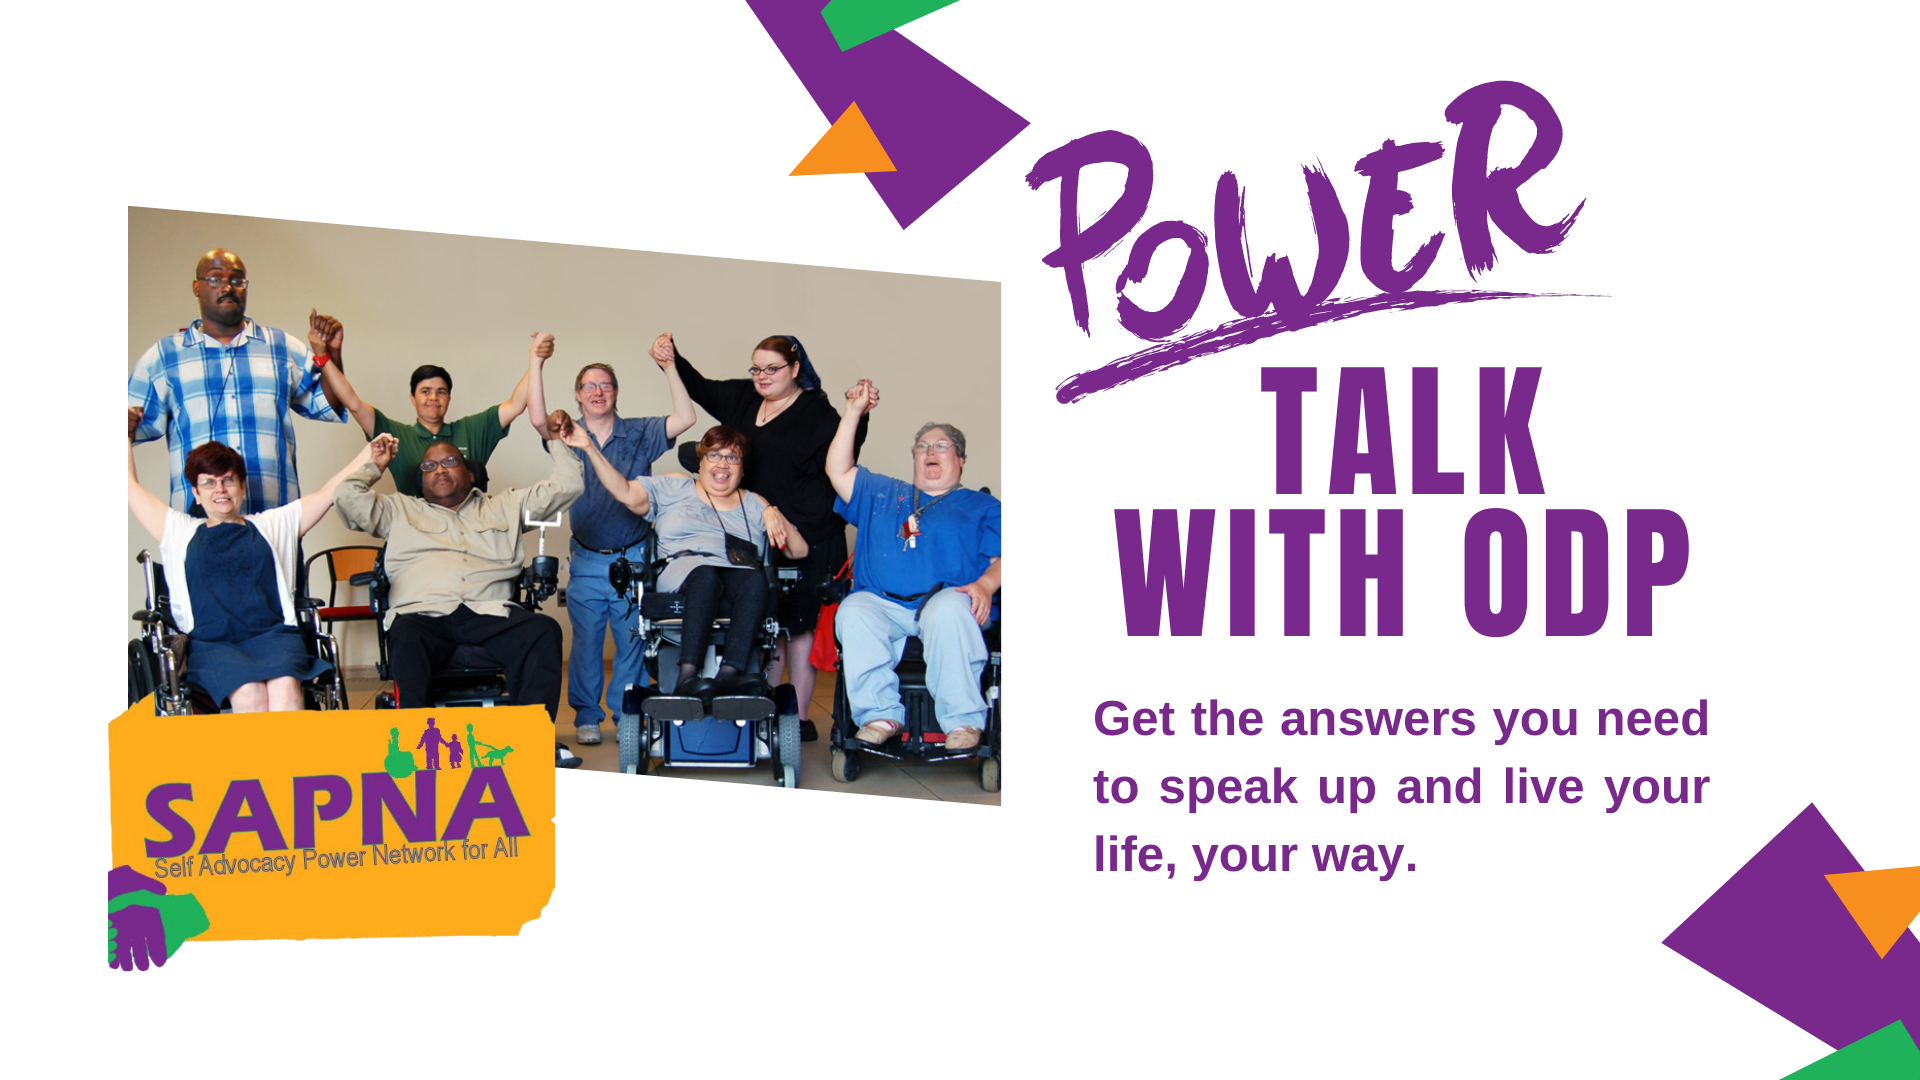 Banner. On the left half is an image of a smiling group of people holding hands with arms raised, some standing some using wheelchairs.  Below that photo is the SAPNA Self Advocacy Power Network for All Logo. On the right, text reads: POWER TALK WITH ODP Get the answers you need to speak up and live your life, your way.